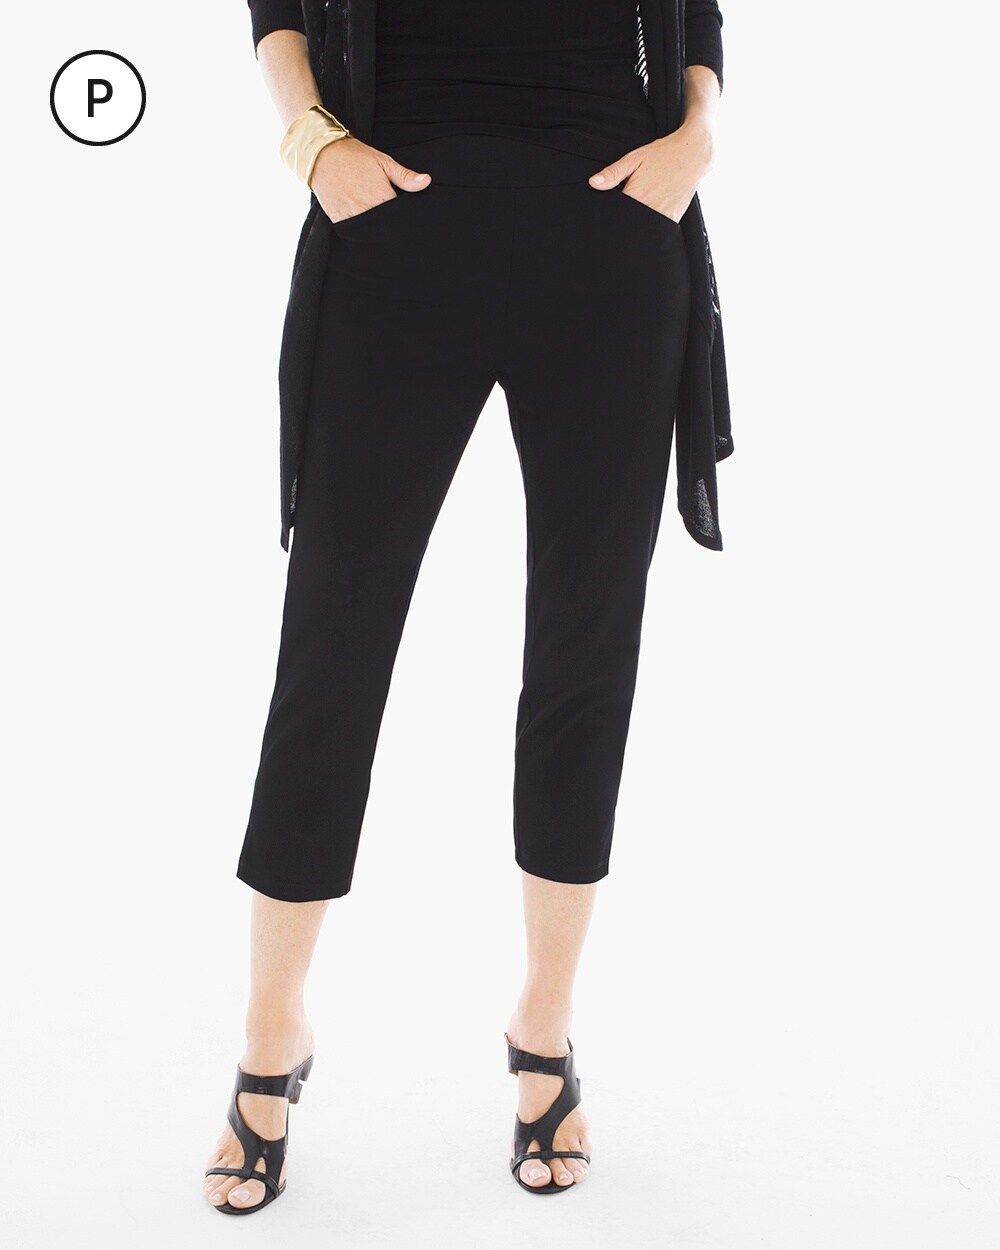 Travelers Collection Petite Crepe Crop Pants